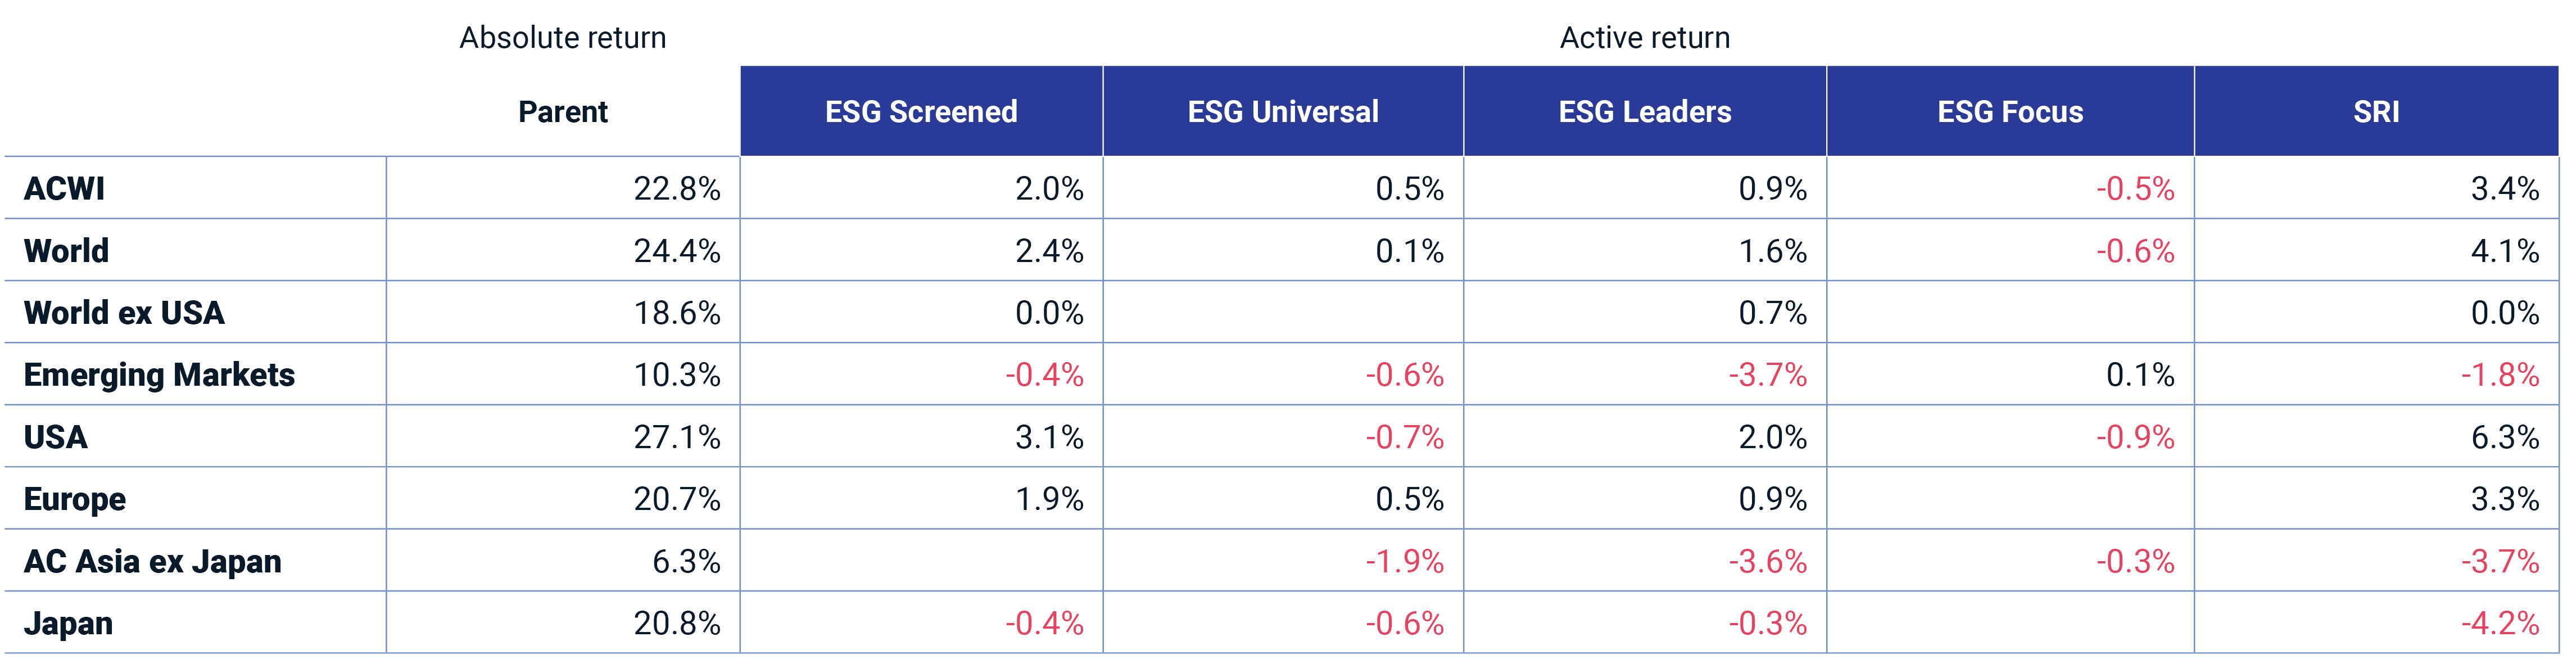 This exhibit shows the active returns of the flagship MSCI ESG Indexes across regions for 2023. 